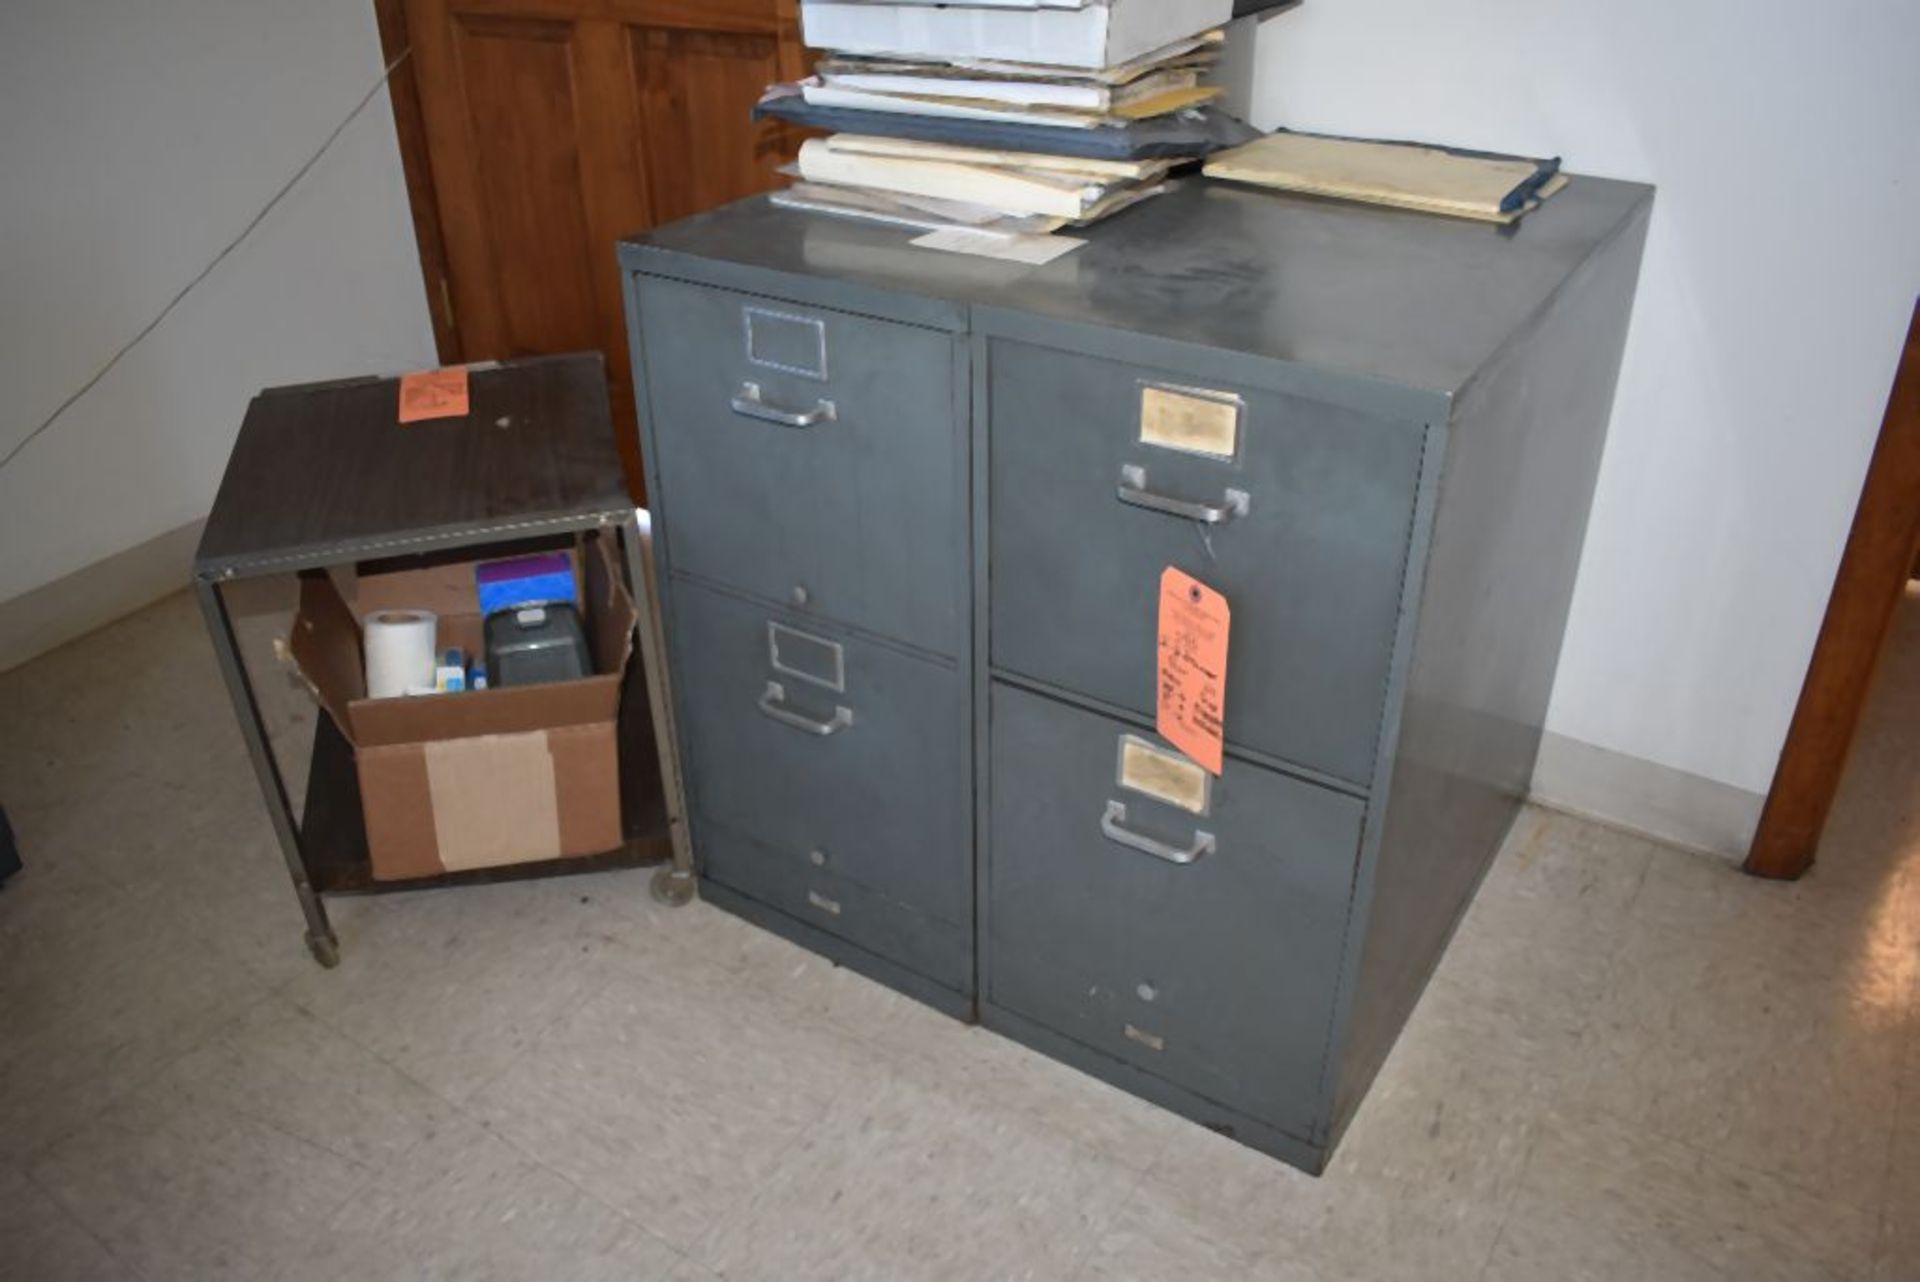 (2) TWO DRAWER FILE CABINETS, 28"D x 31"H x 15"W, **MANUALS NOT INCLUDED**